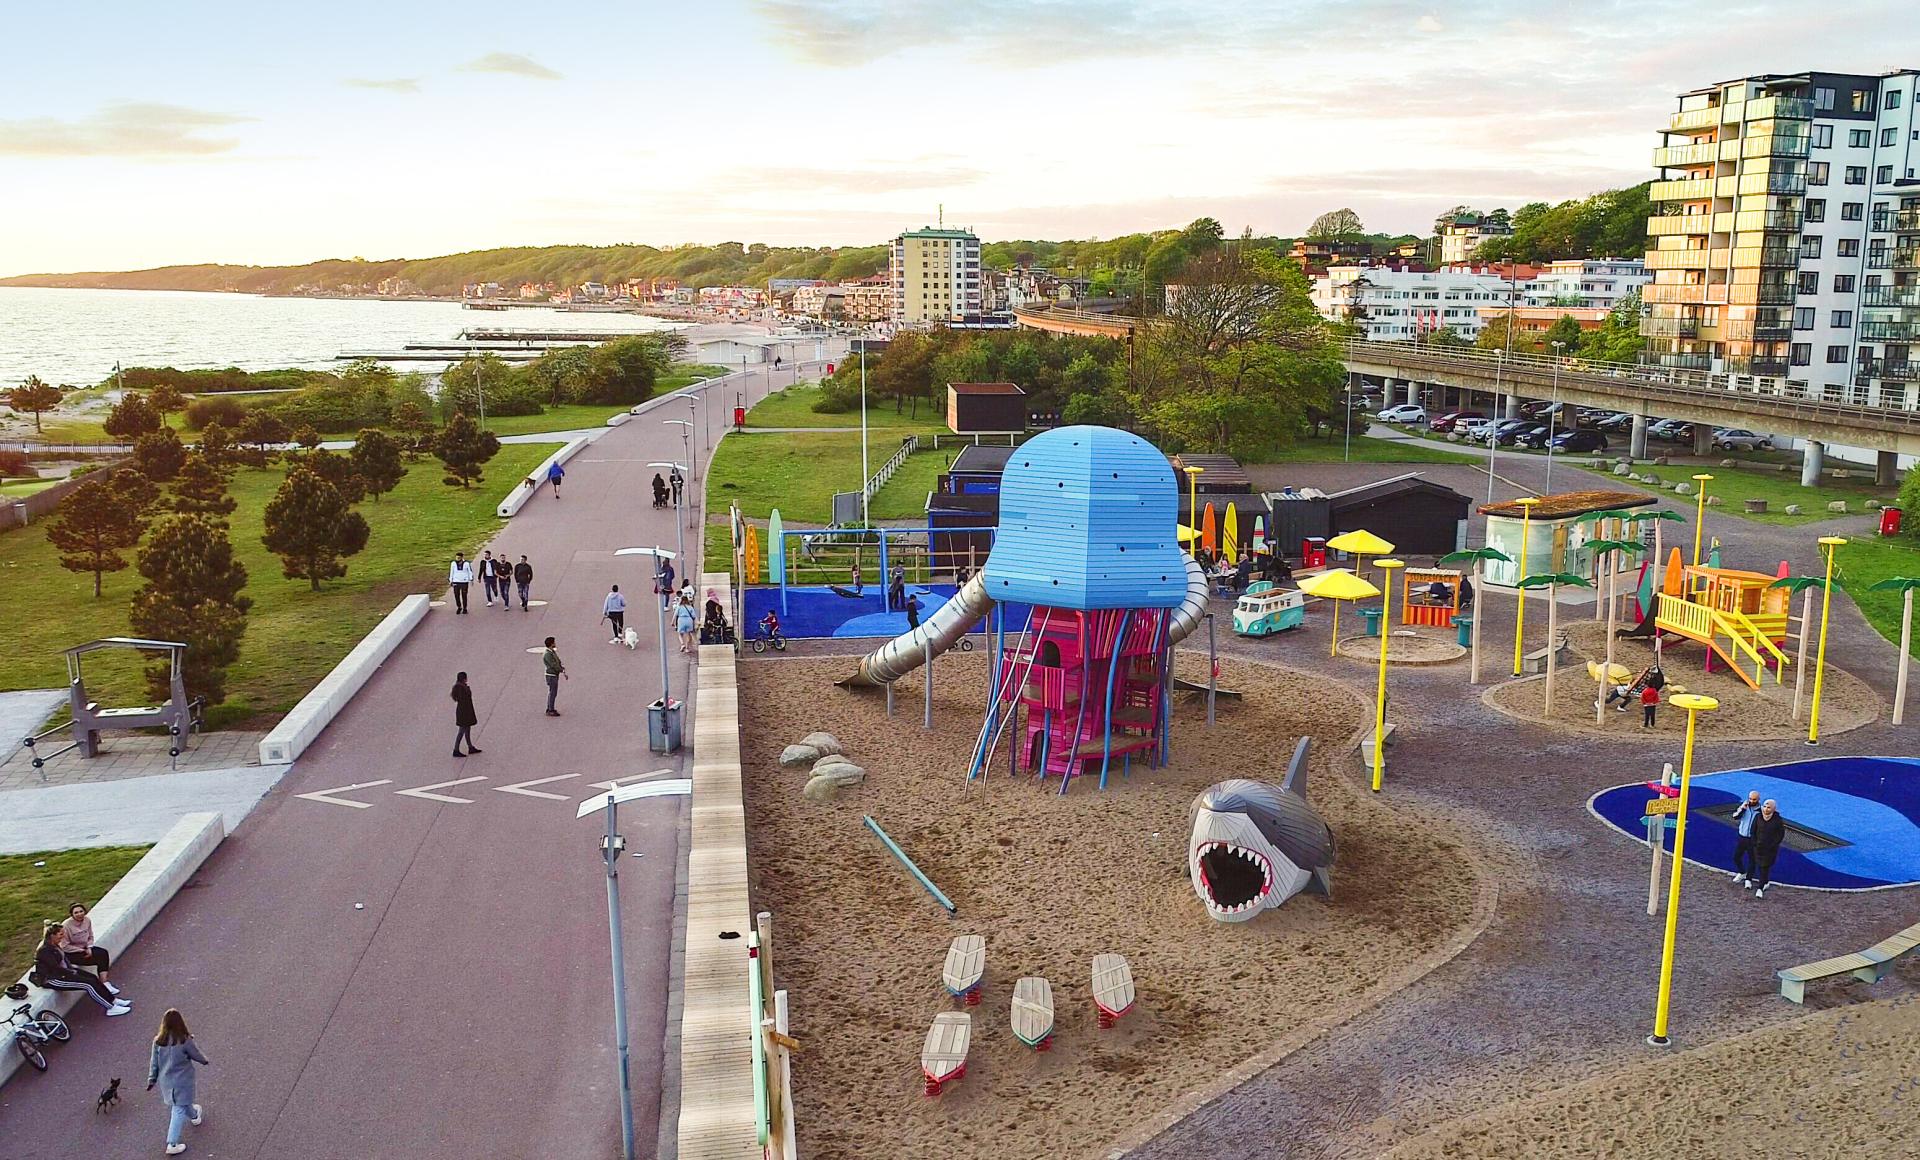 The Surf Playground of Helsingborg, Sweden MONSTRUM artistic playgrounds